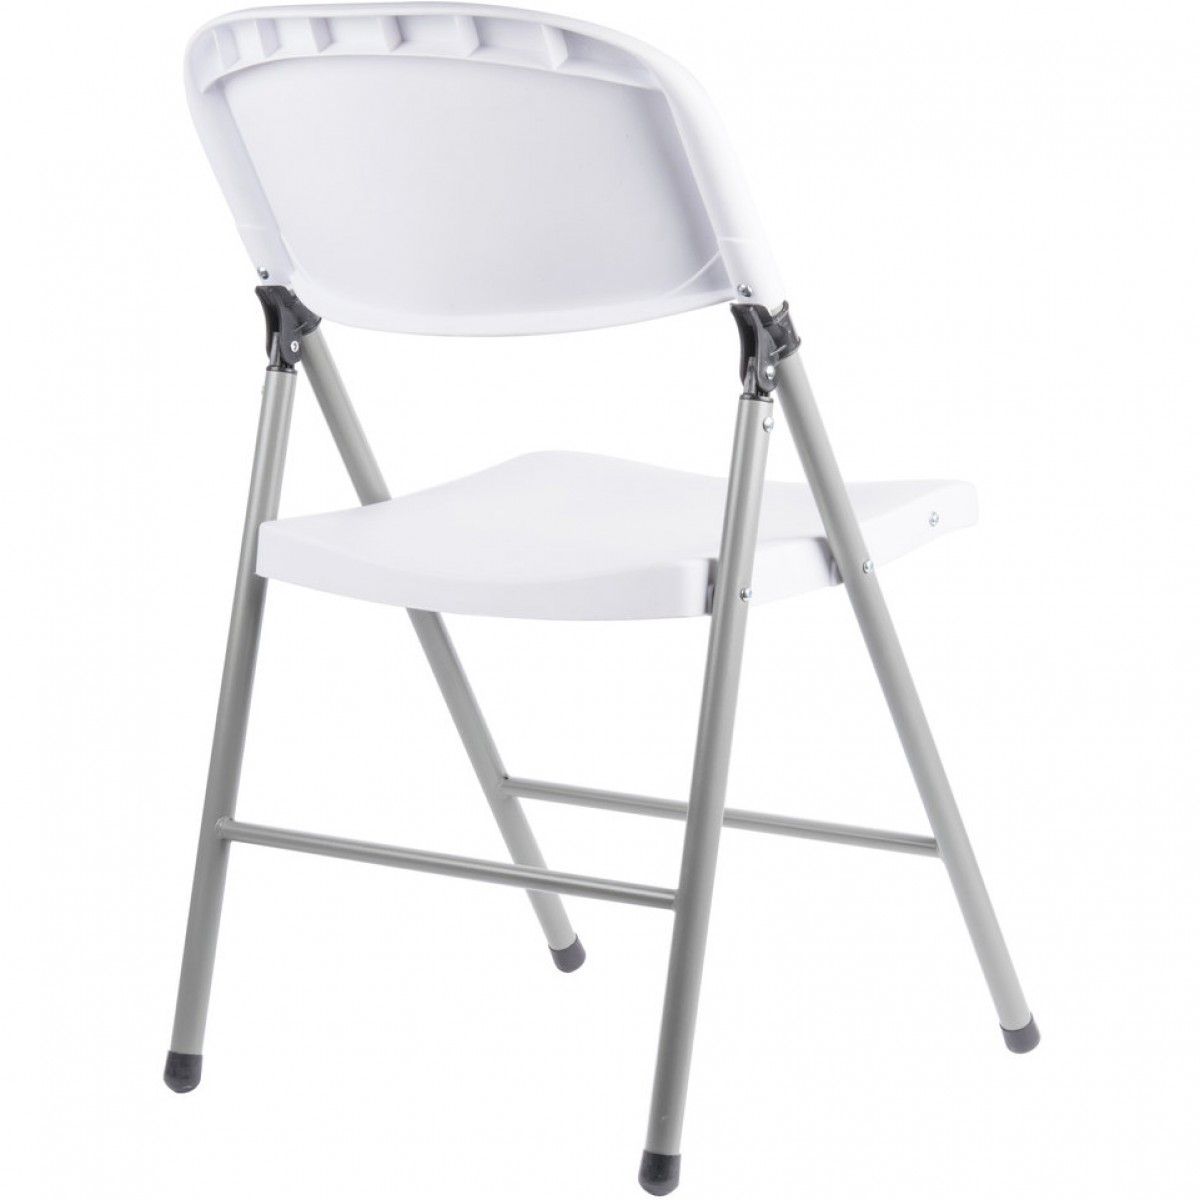 Plastic folding chair white seat and back , sturdy silver legs and black protective feet , easy to clean 